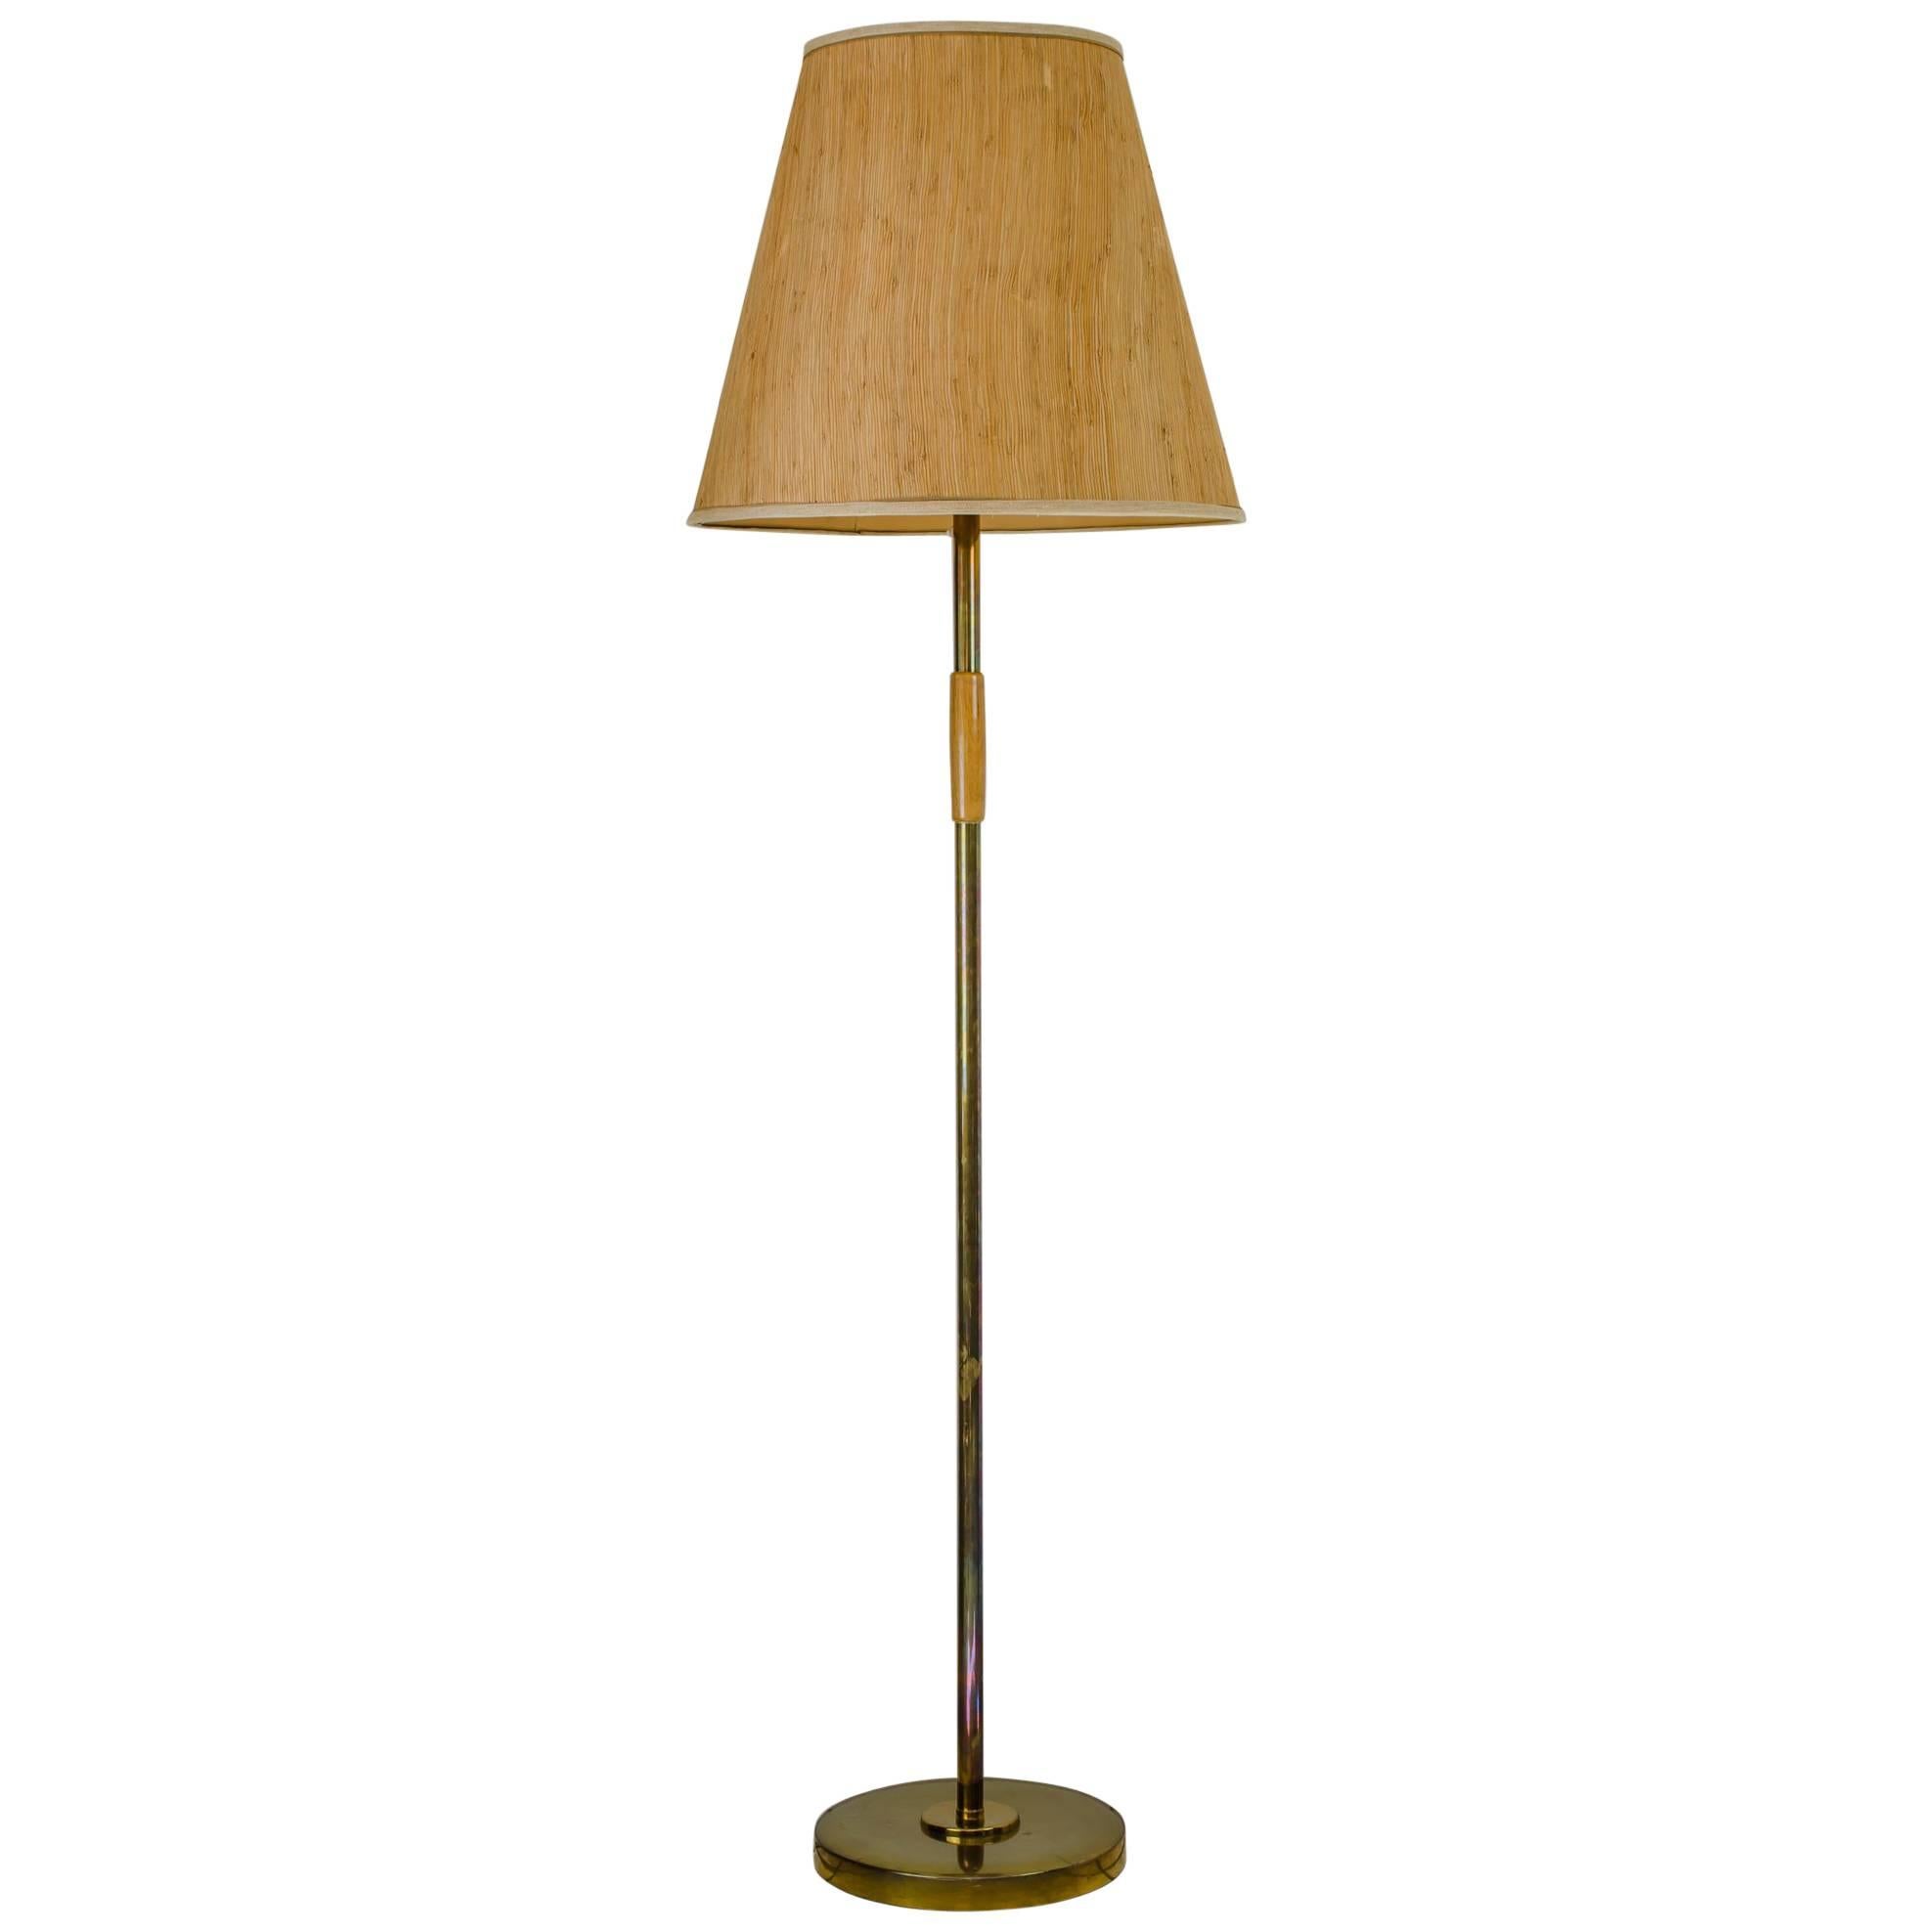 Floor Lamp by J.T. Kalmar in the 1950s Design is Attributed to Josef Frank